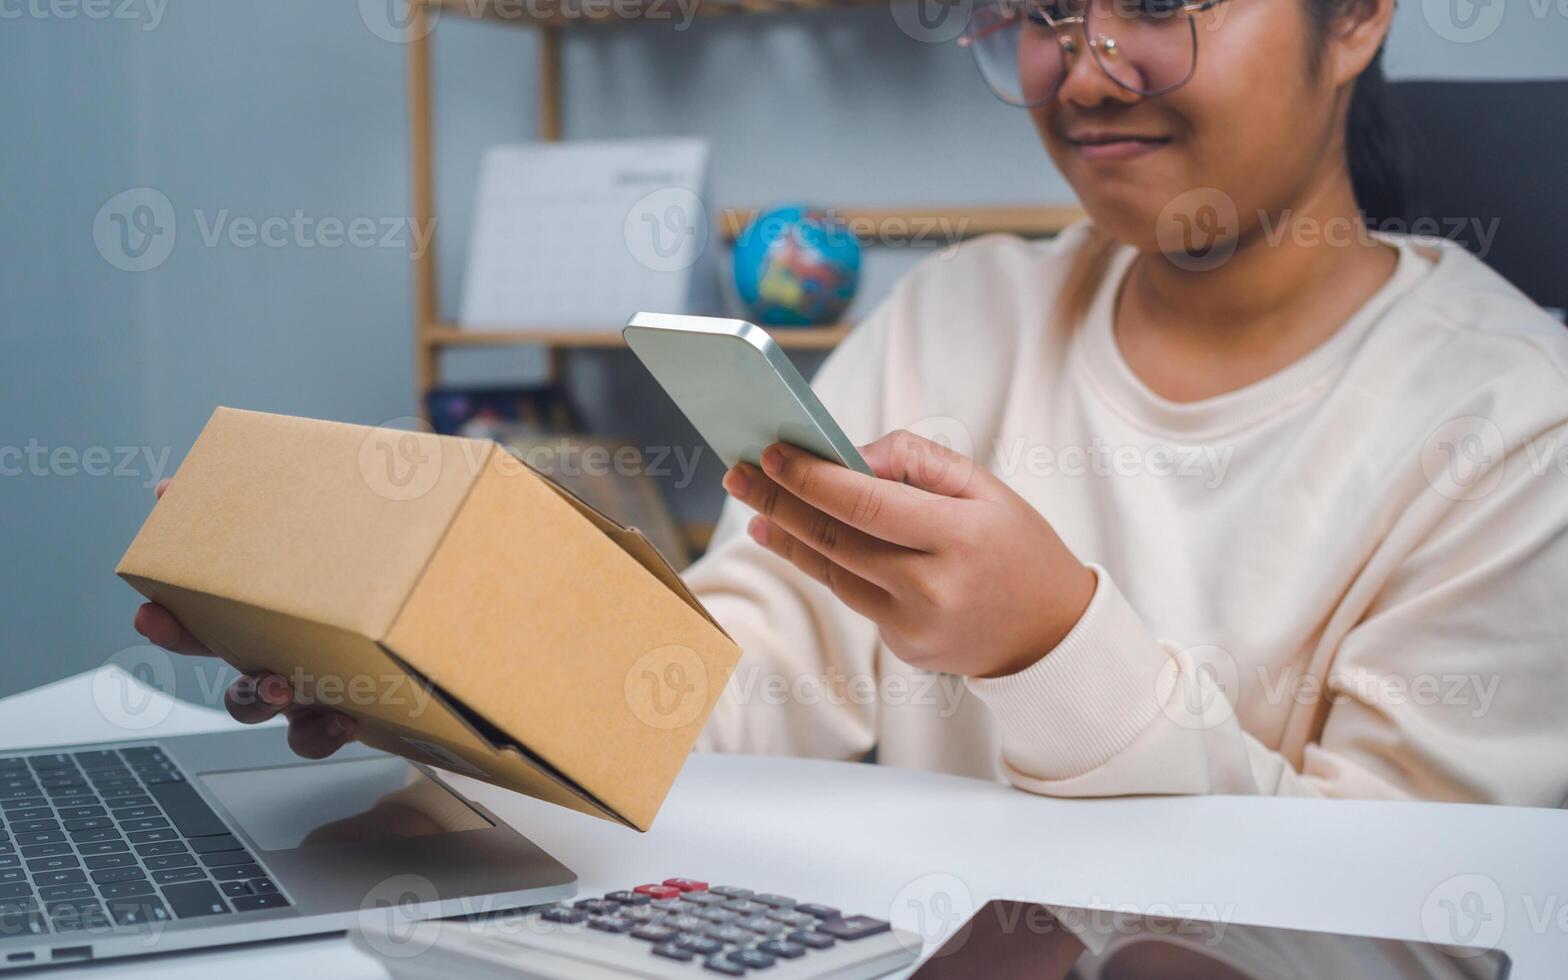 Woman runs an e-commerce business is checking orders from laptop, she owns an online store, she packs and ships through a private transport company. Online selling and online shopping concepts. photo